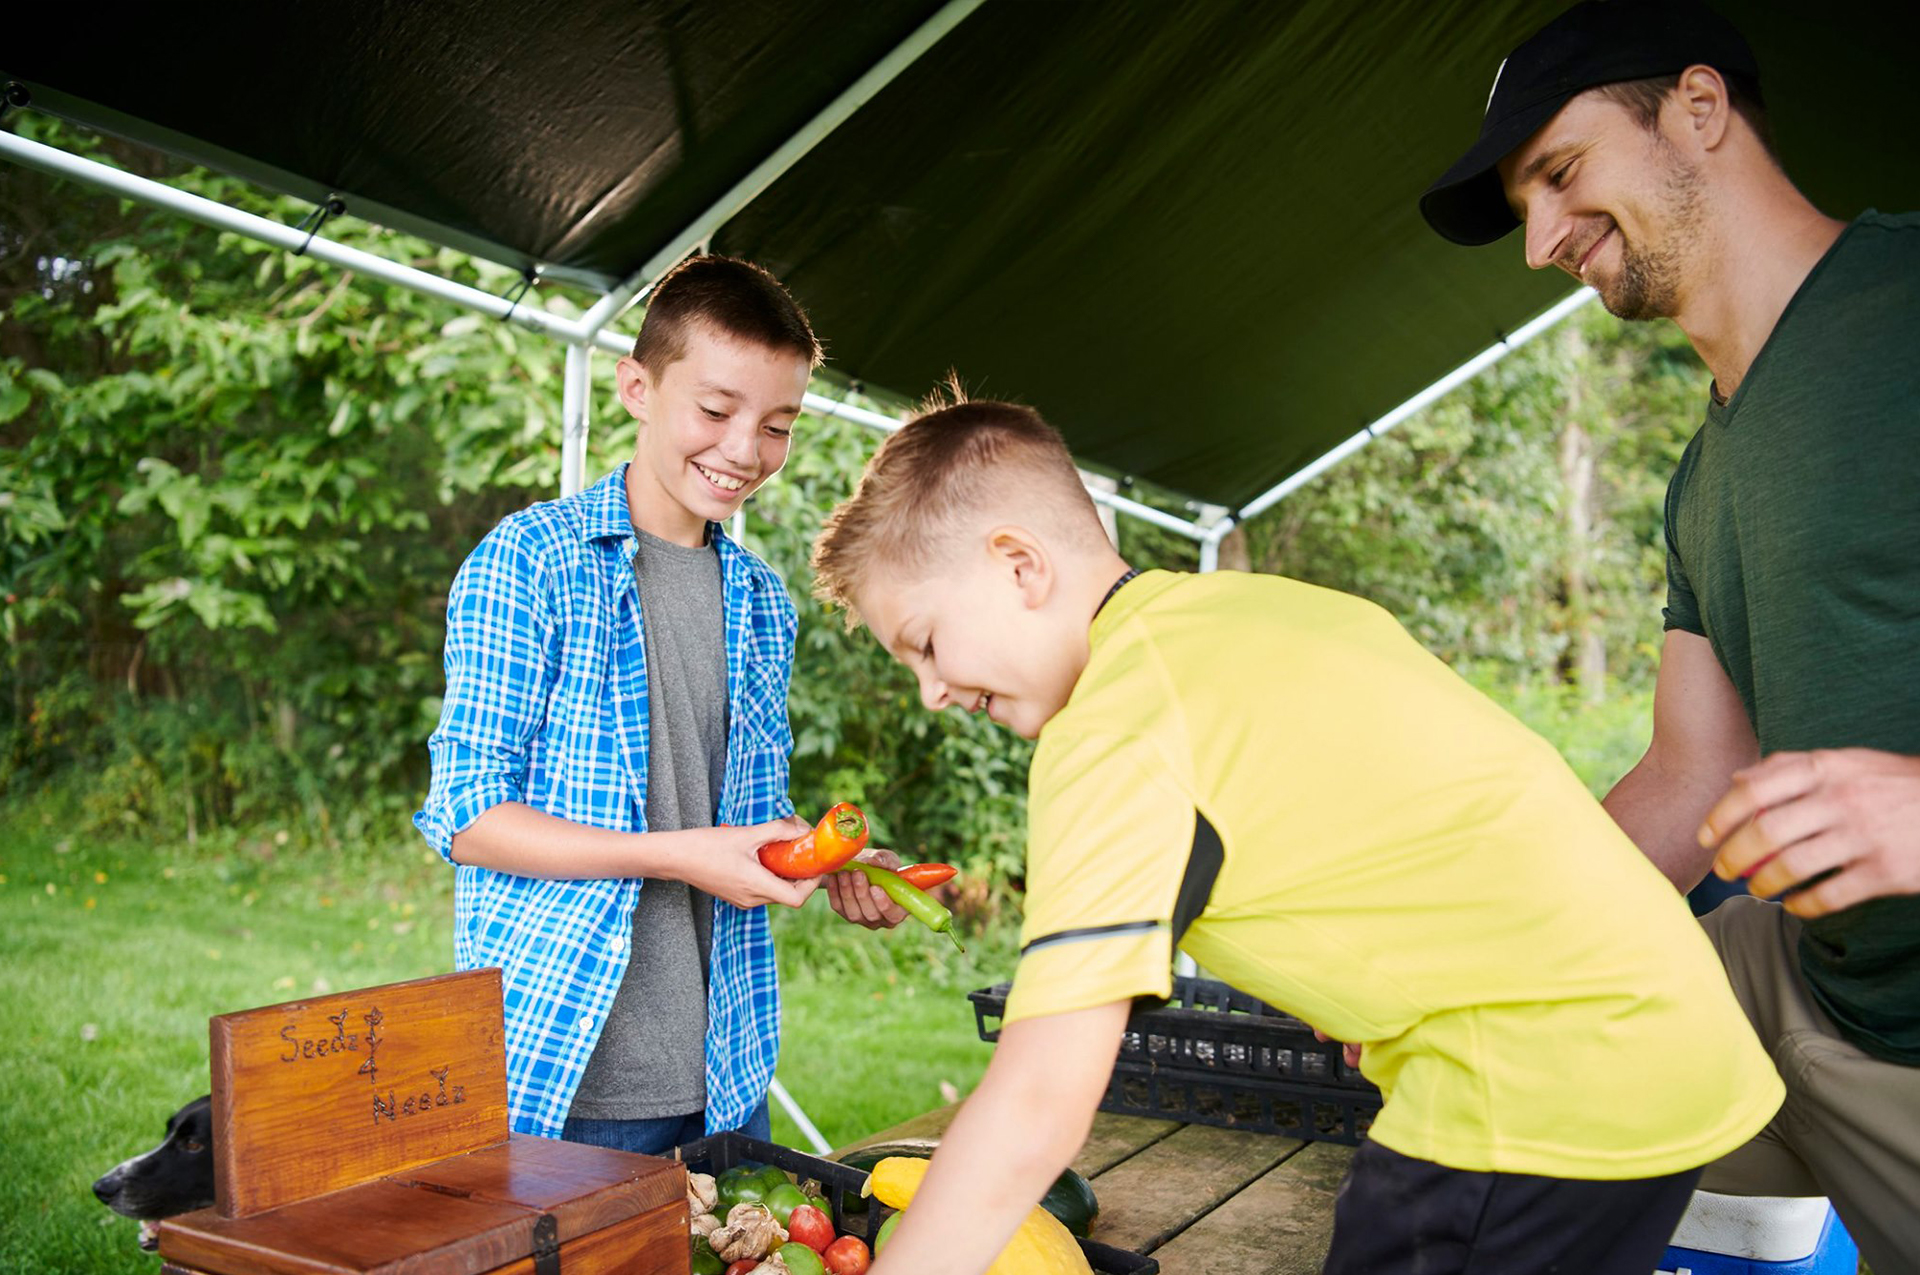 Jakob selling vegetables to a young boy and his dad